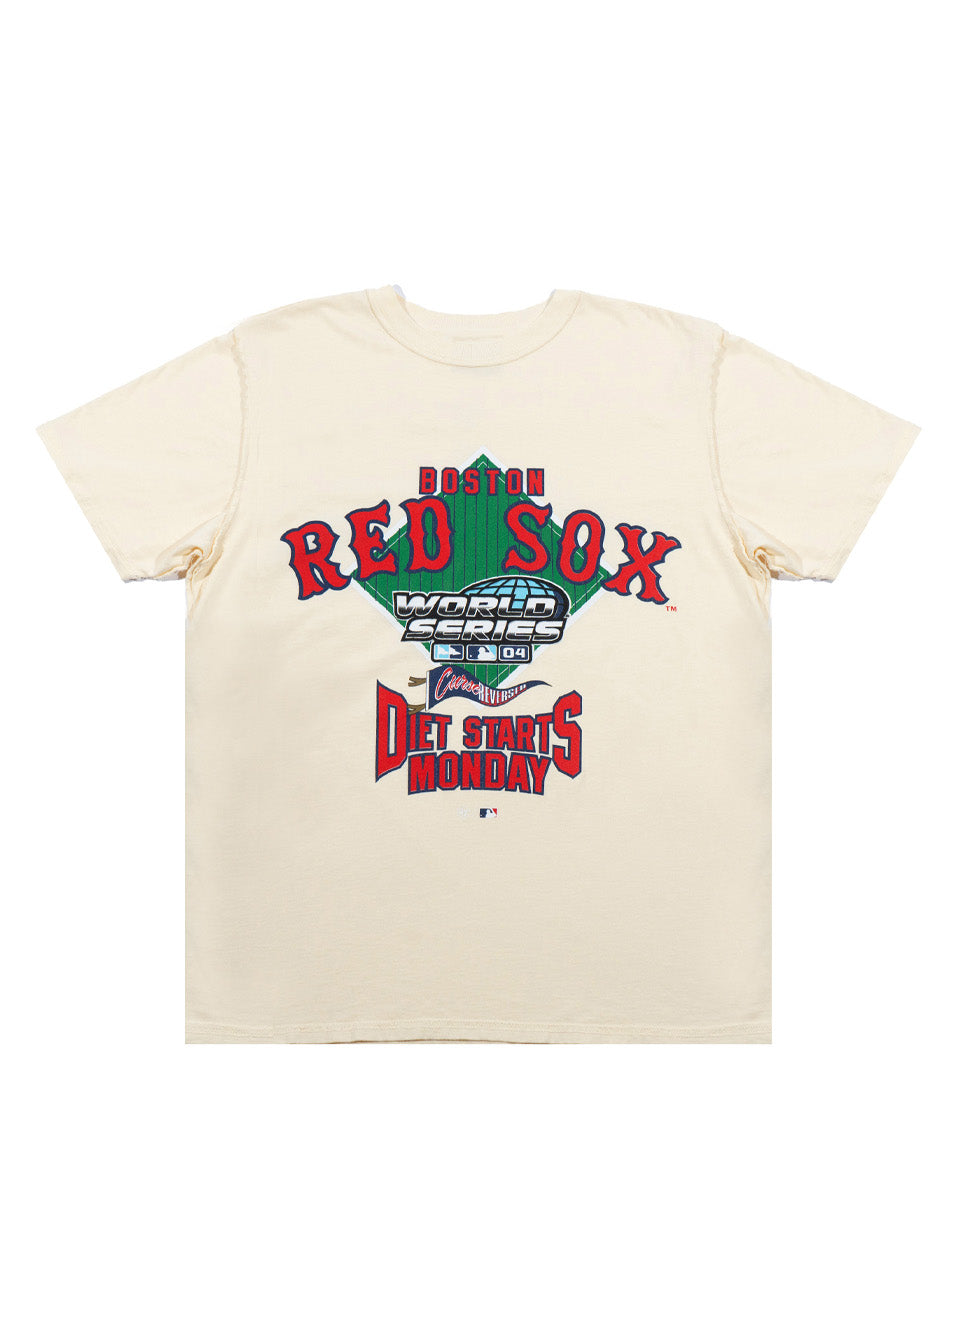 Red Sox 04 WS Tee - Antique White